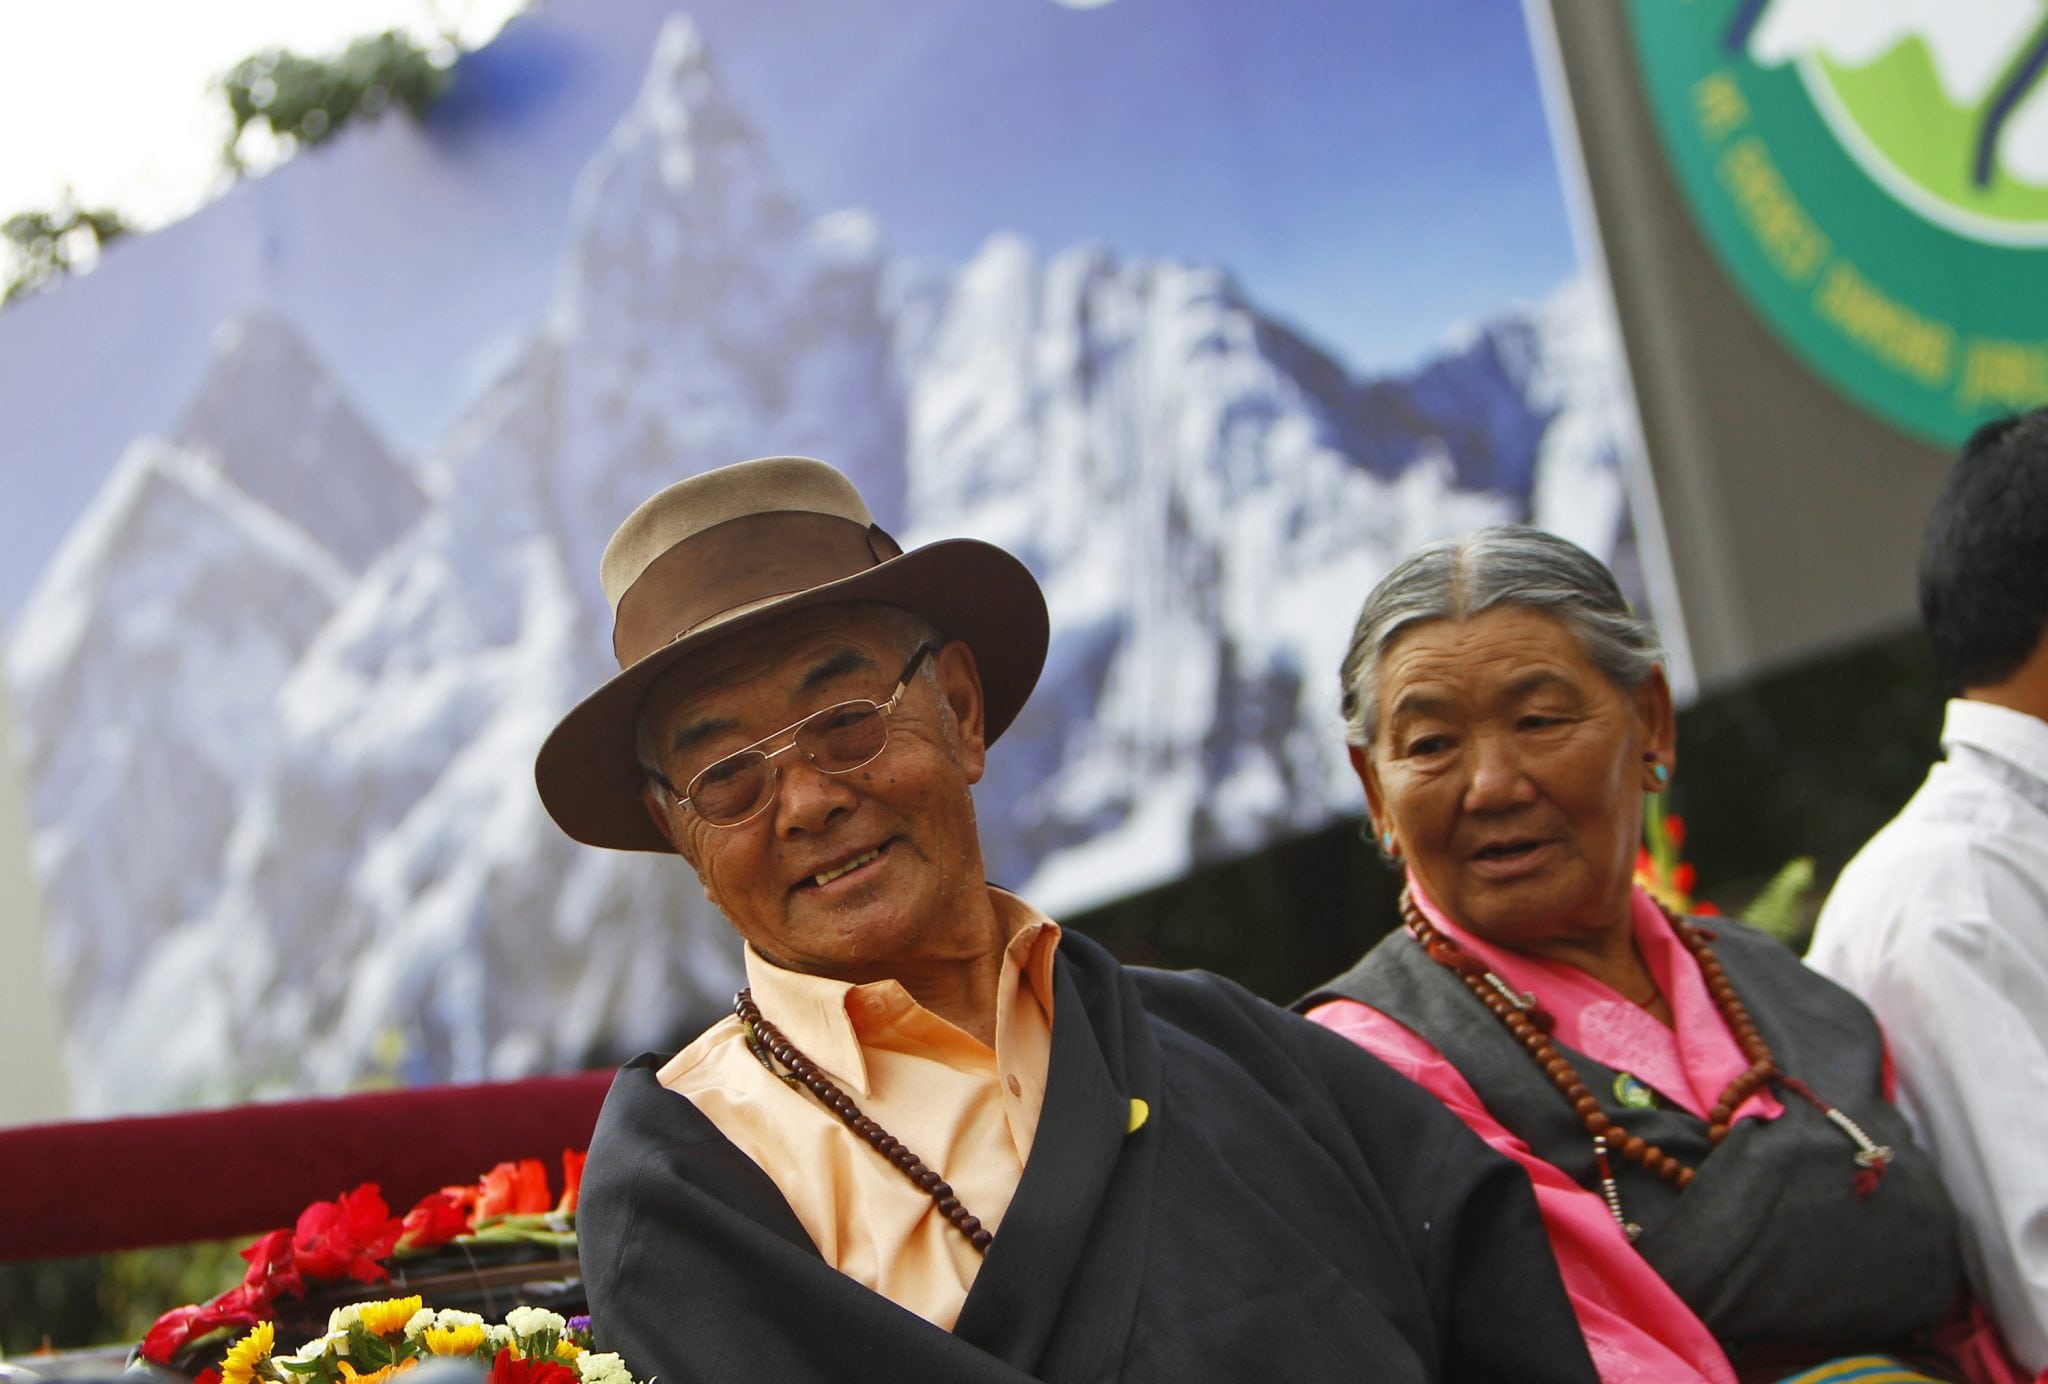 This year, Nepal marked the 60th anniversary of Everest conquest. 